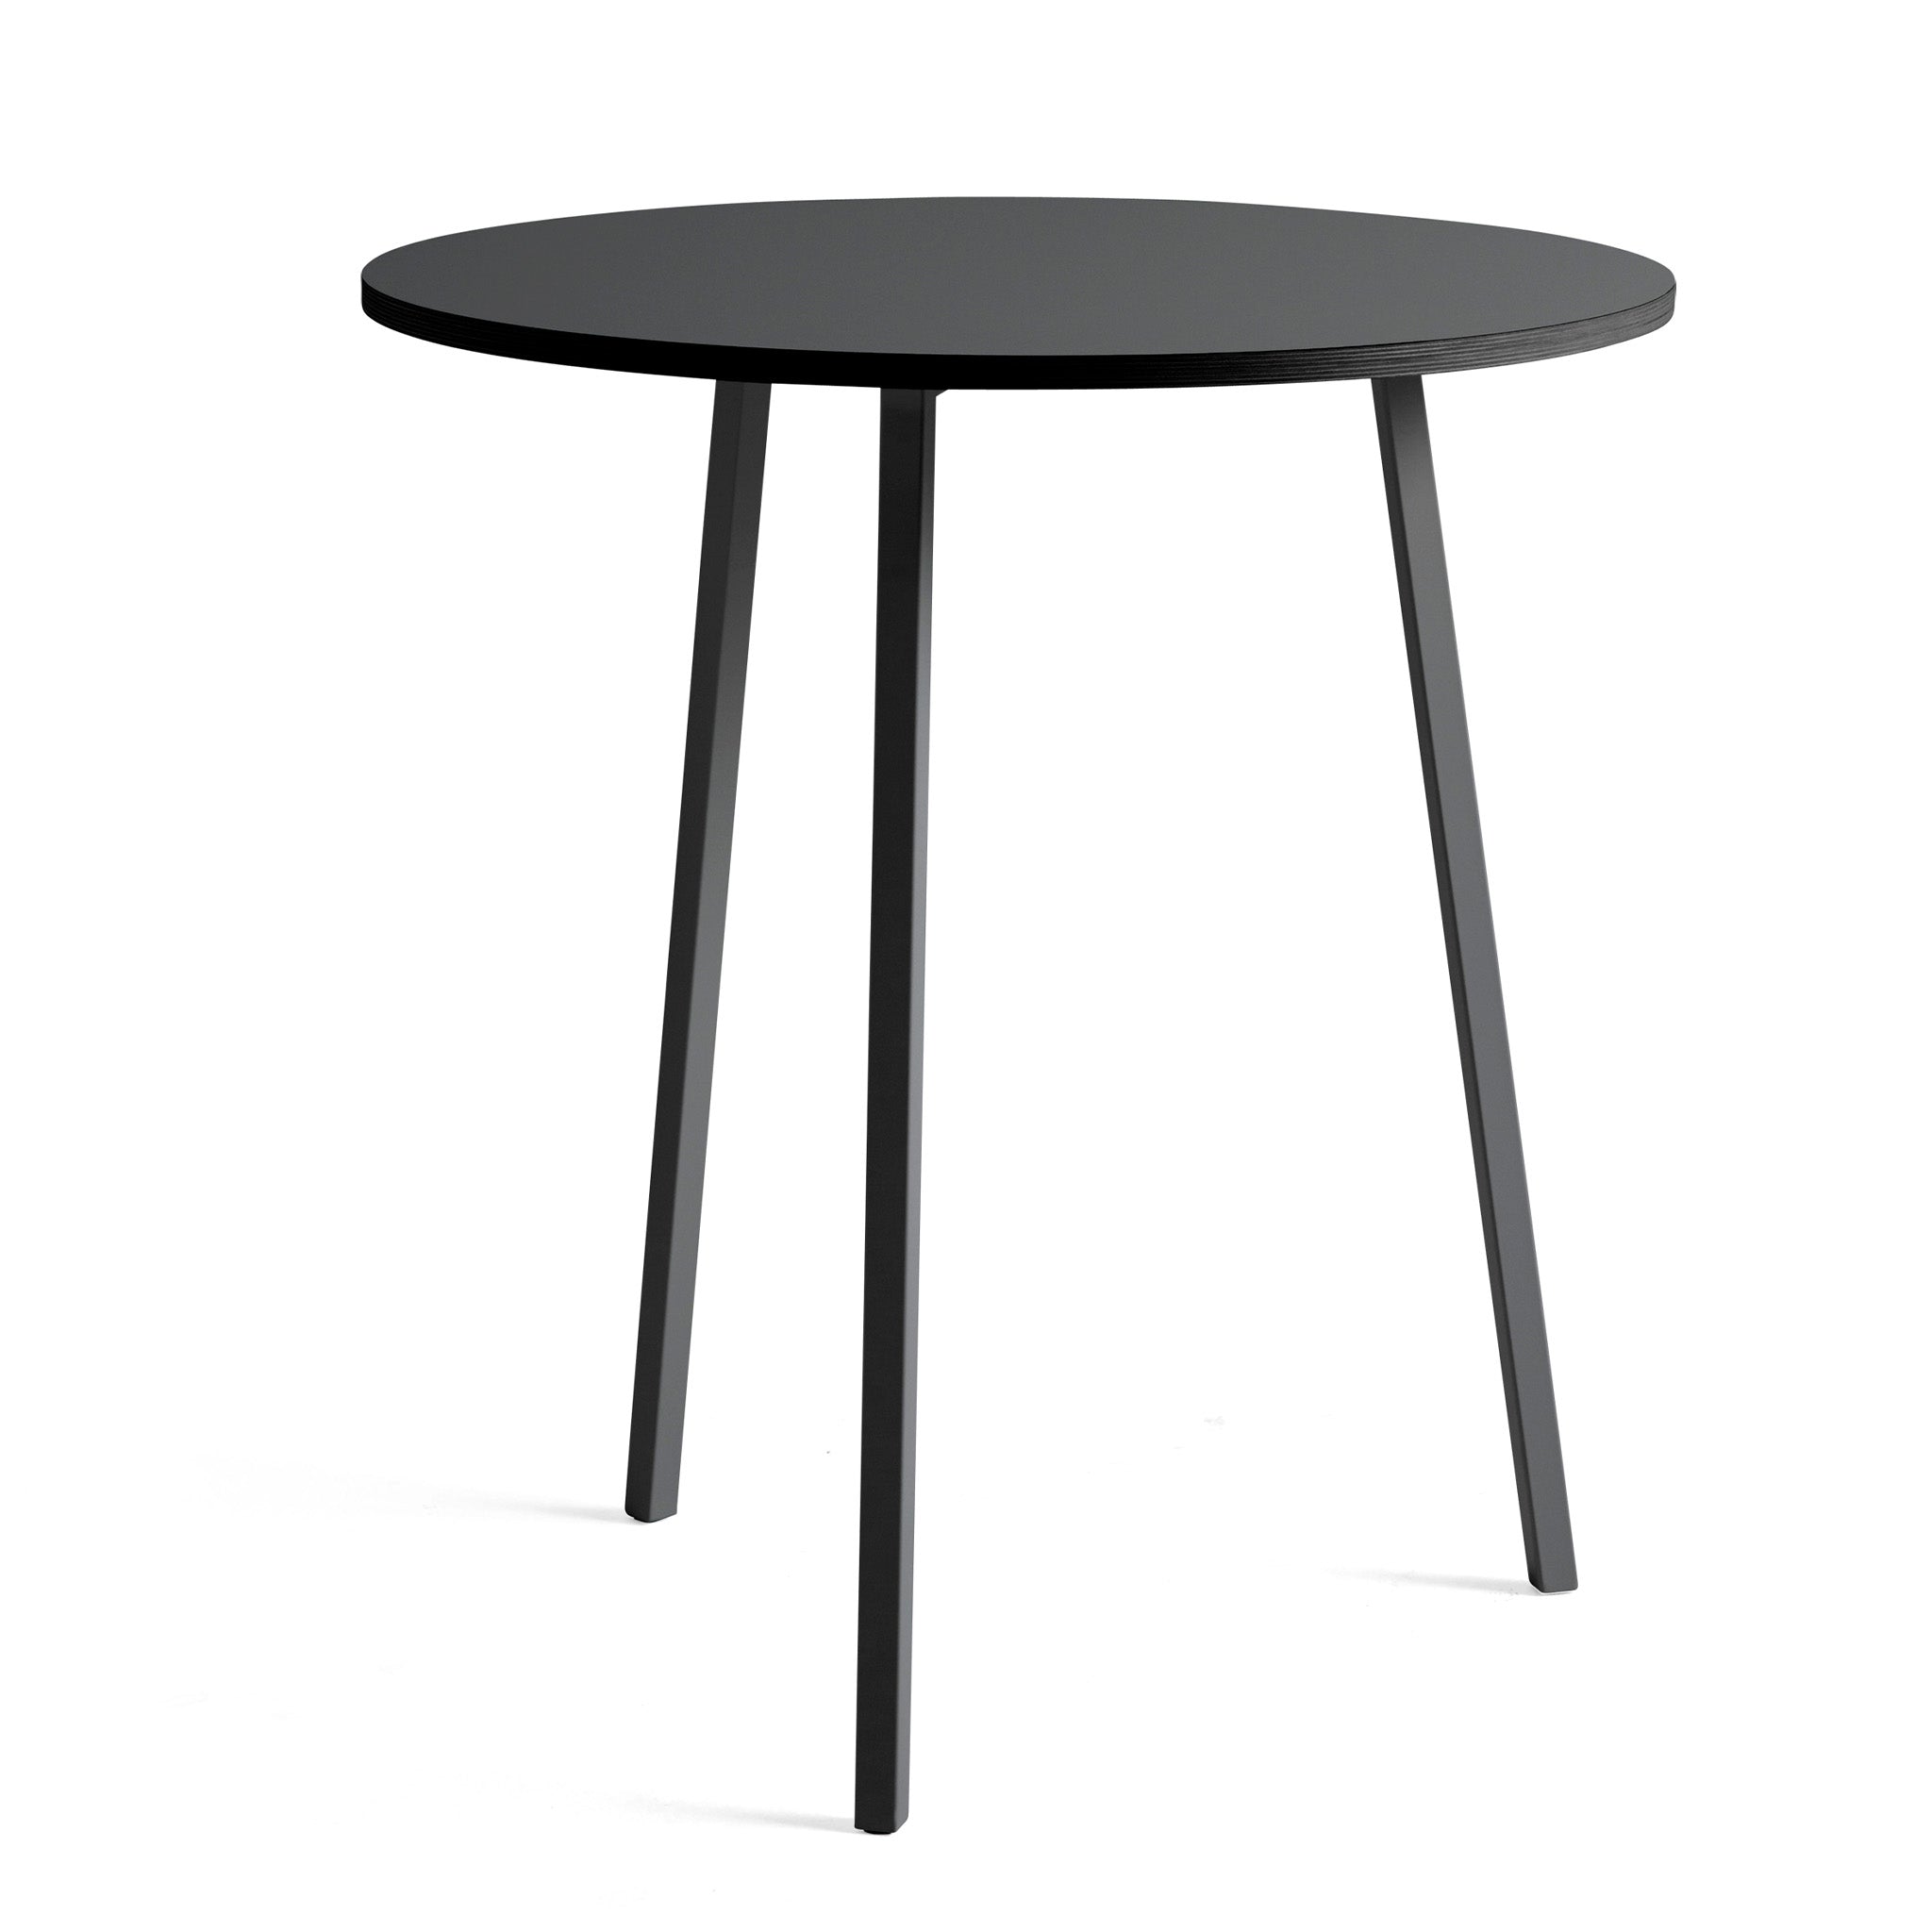 Loop Stand Round Table by Hay